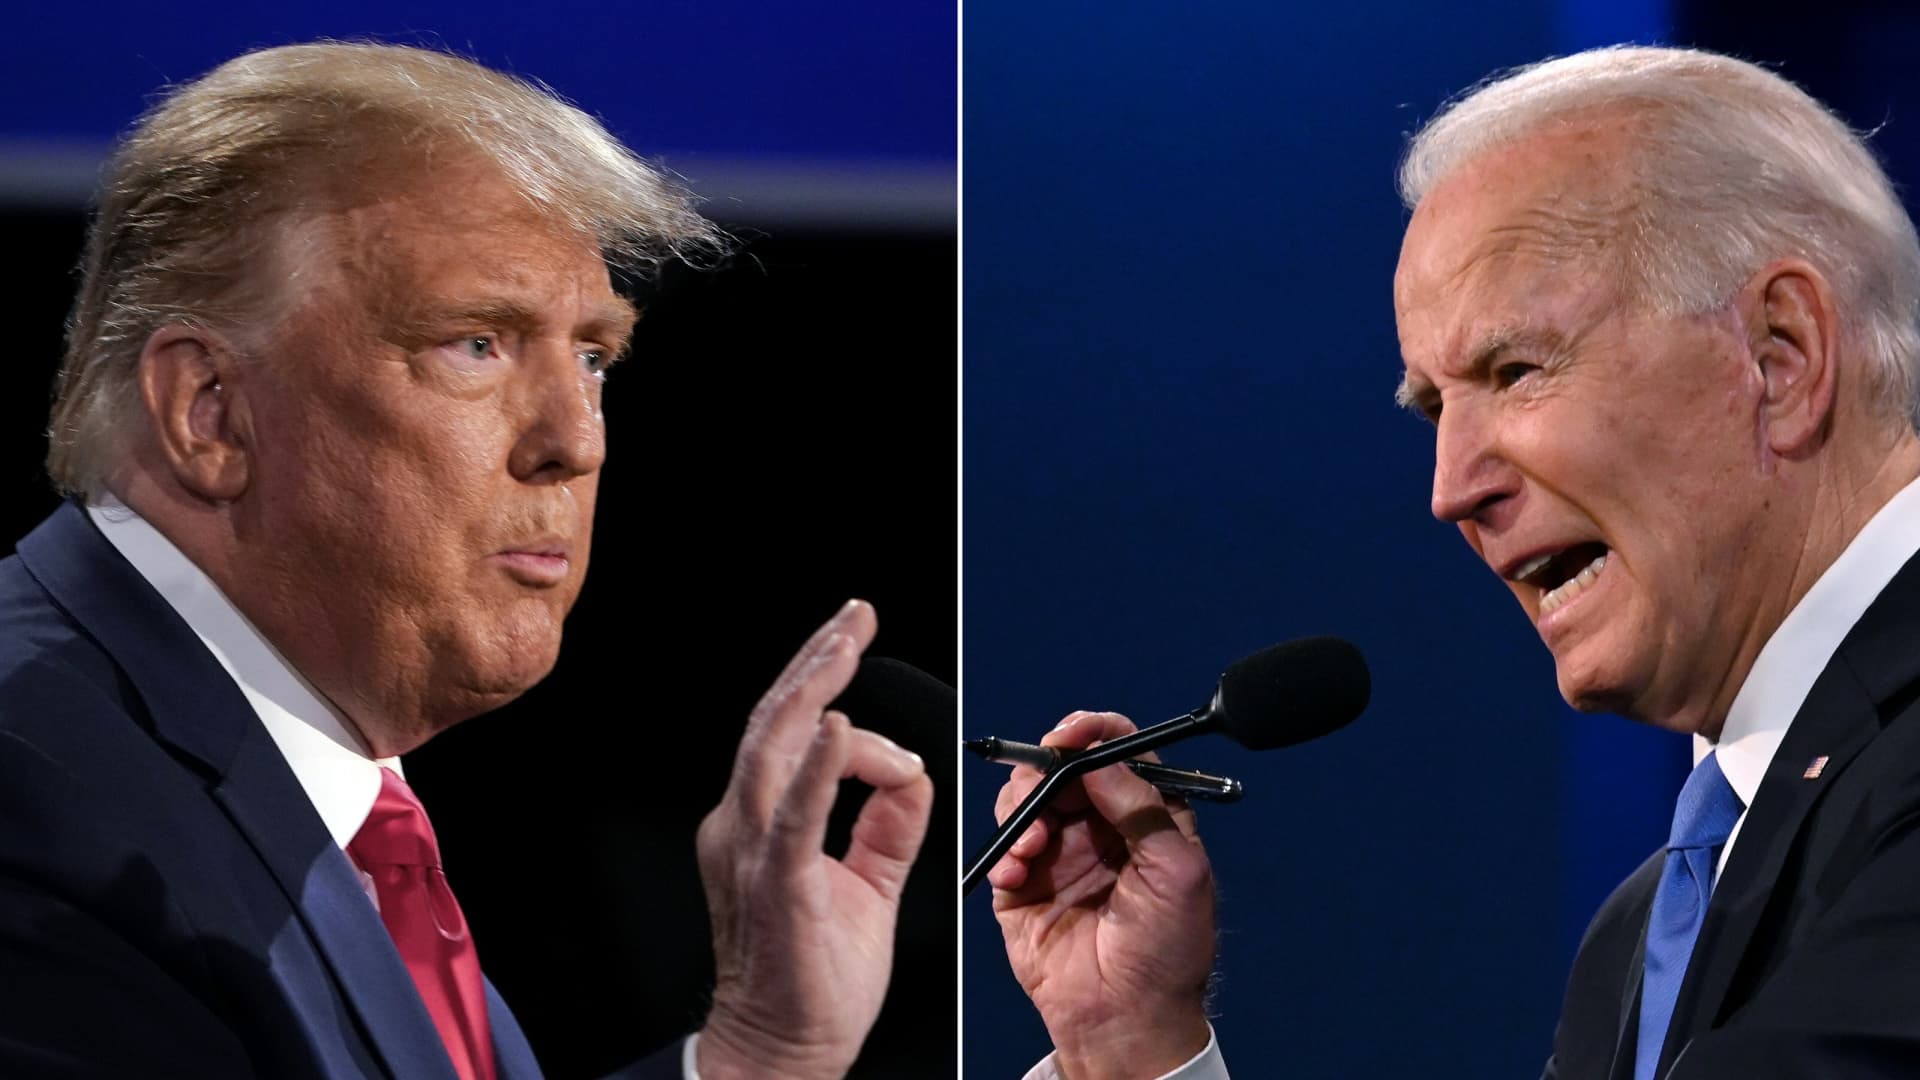 Trump wants to debate Biden 'instantly' — but president shrugs him off